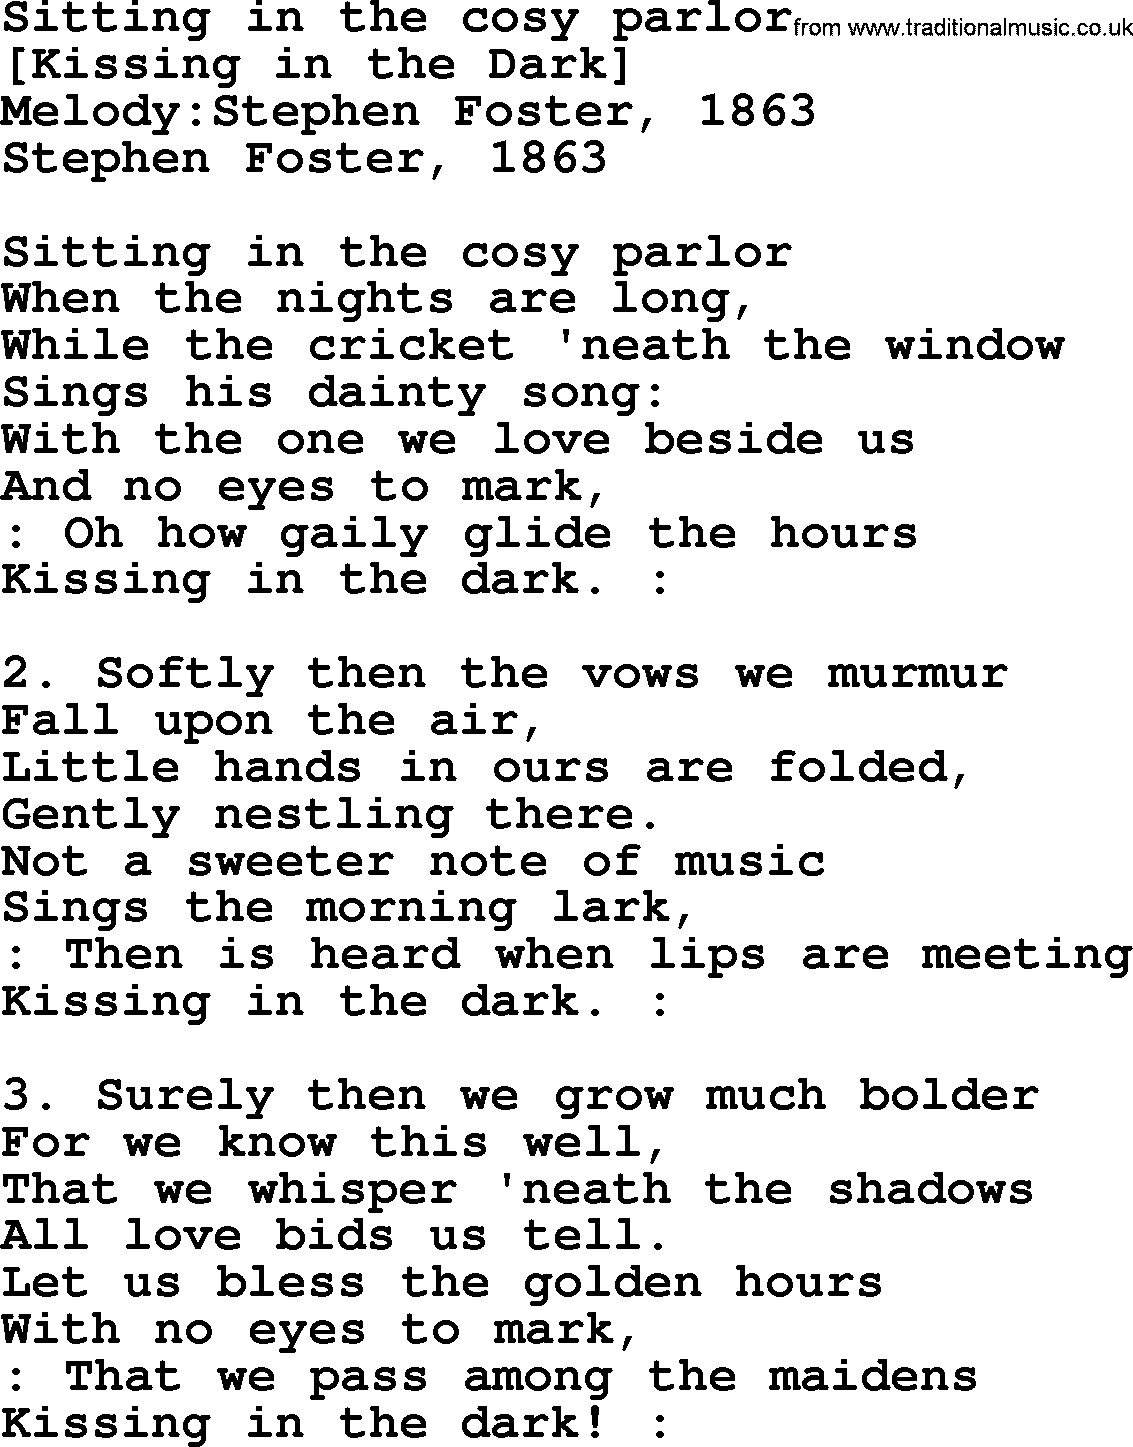 Old American Song: Sitting In The Cosy Parlor, lyrics